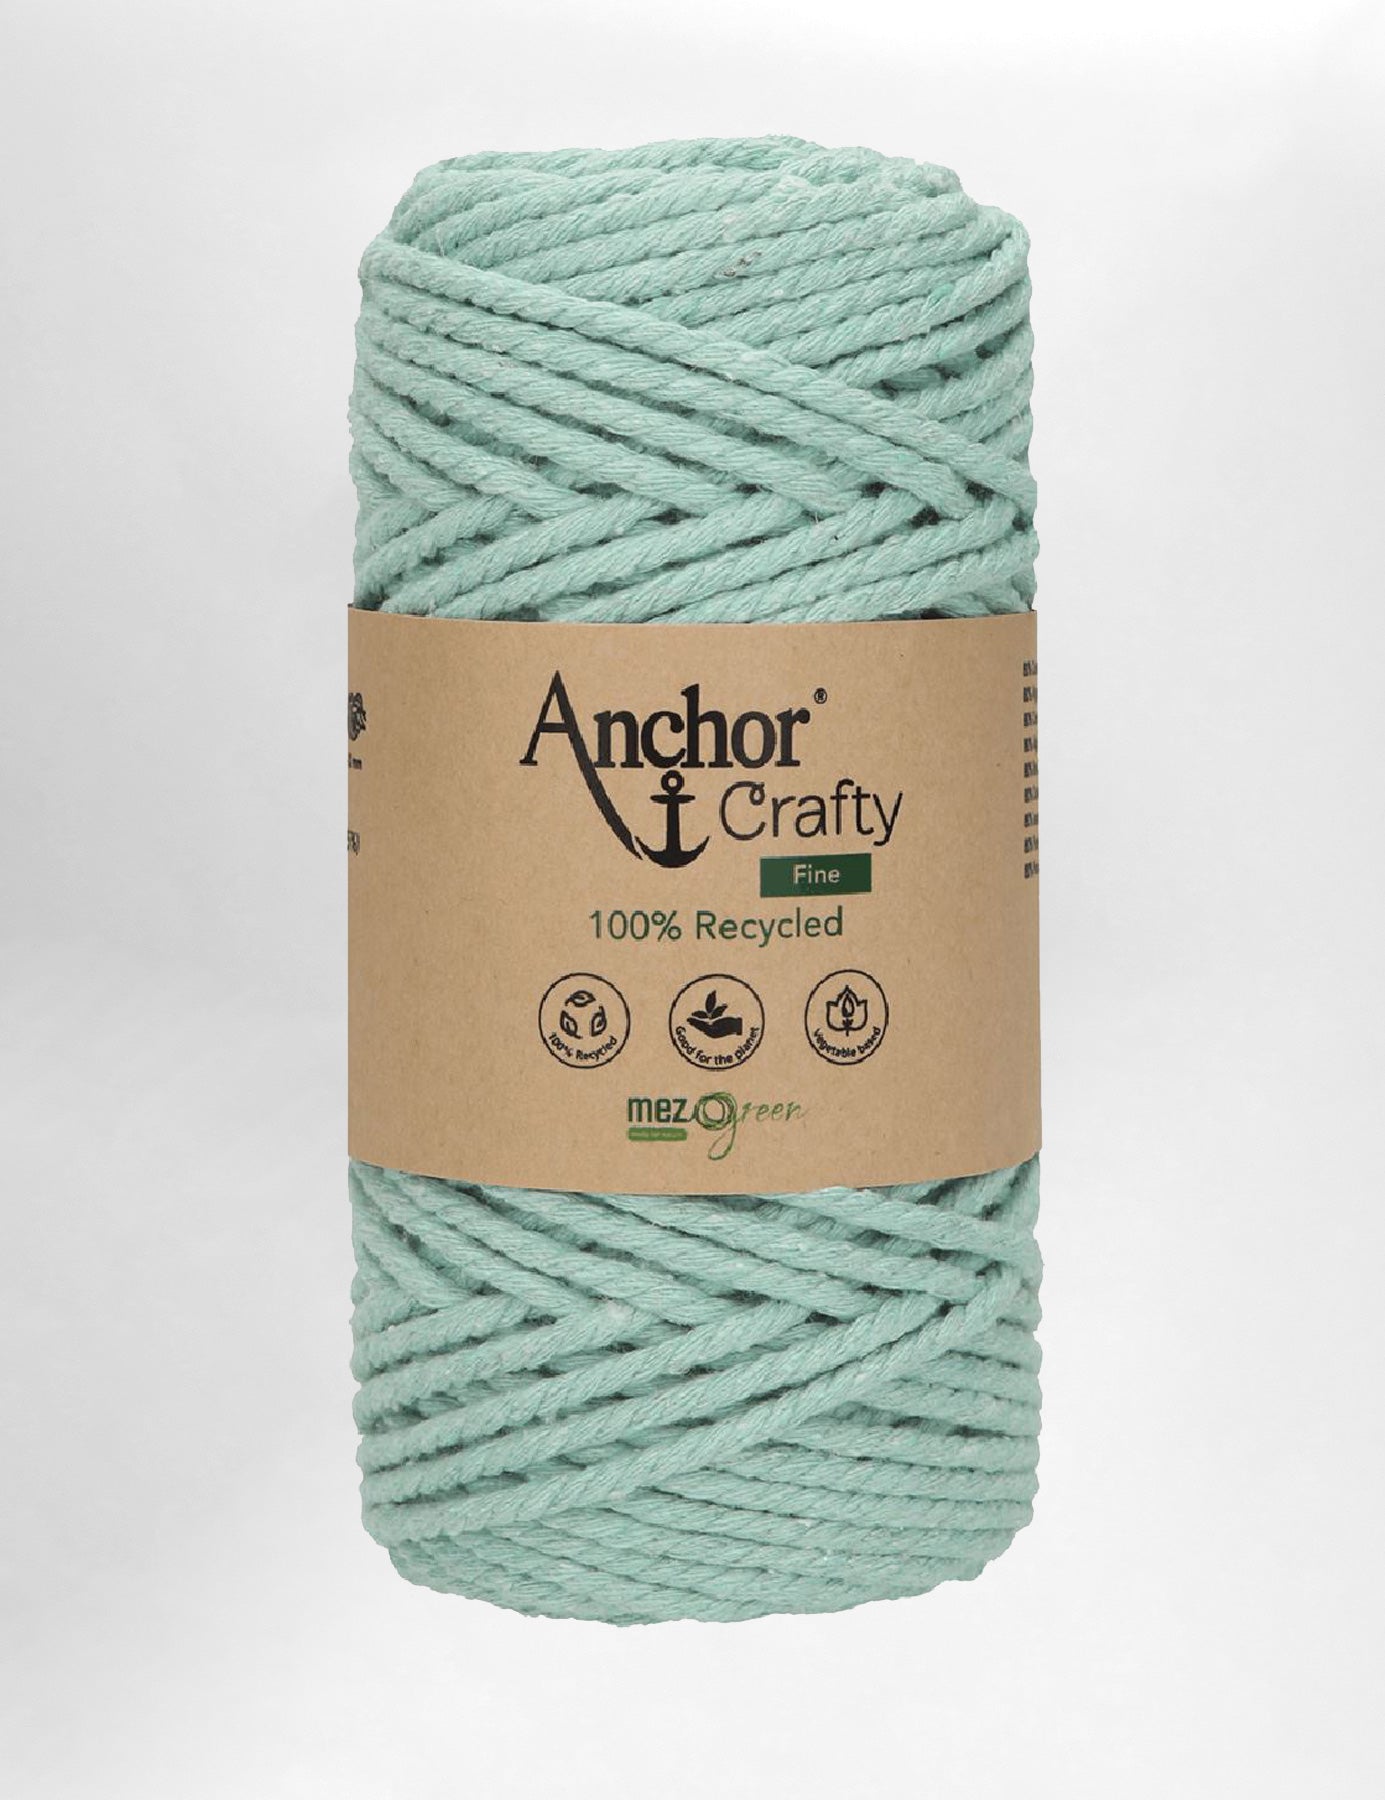 Anchor Crafty 3mm Mint Blue 3ply recycled cotton macrame cord (65m) – Jolly  Good Yarn